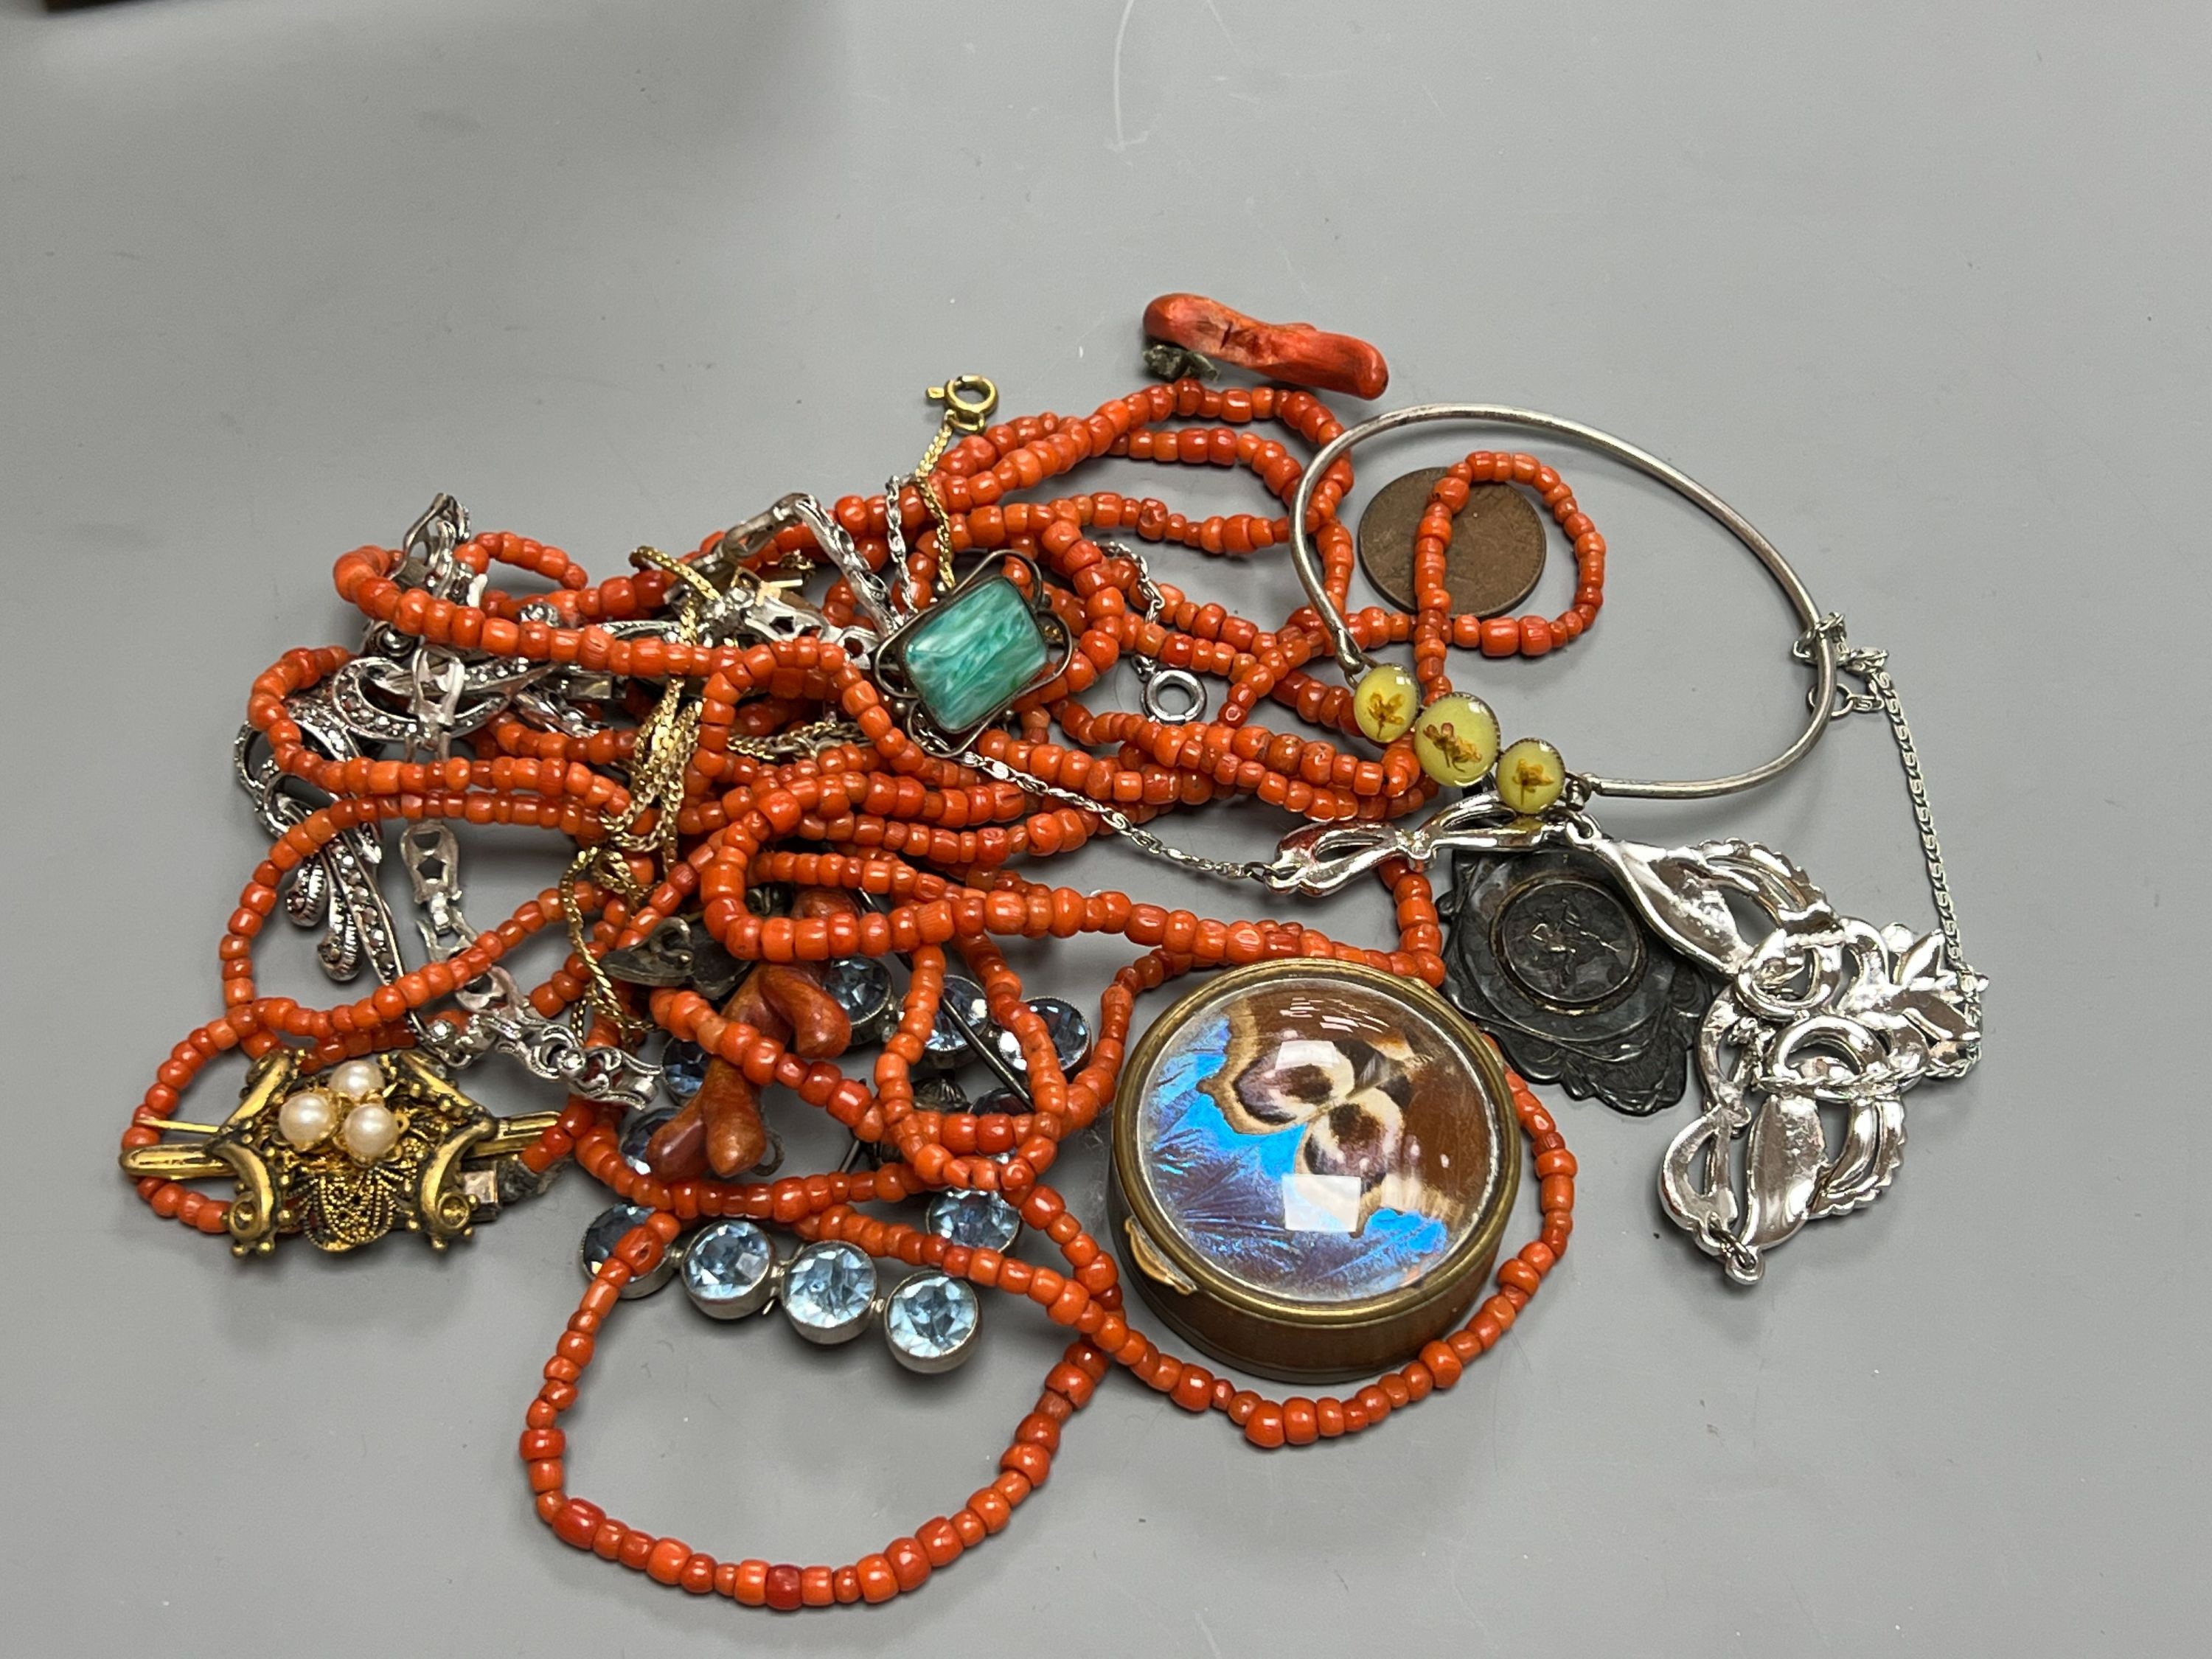 A small group of assorted minor jewellery including a white metal brooch, coral necklace etc. in a small burr walnut box.